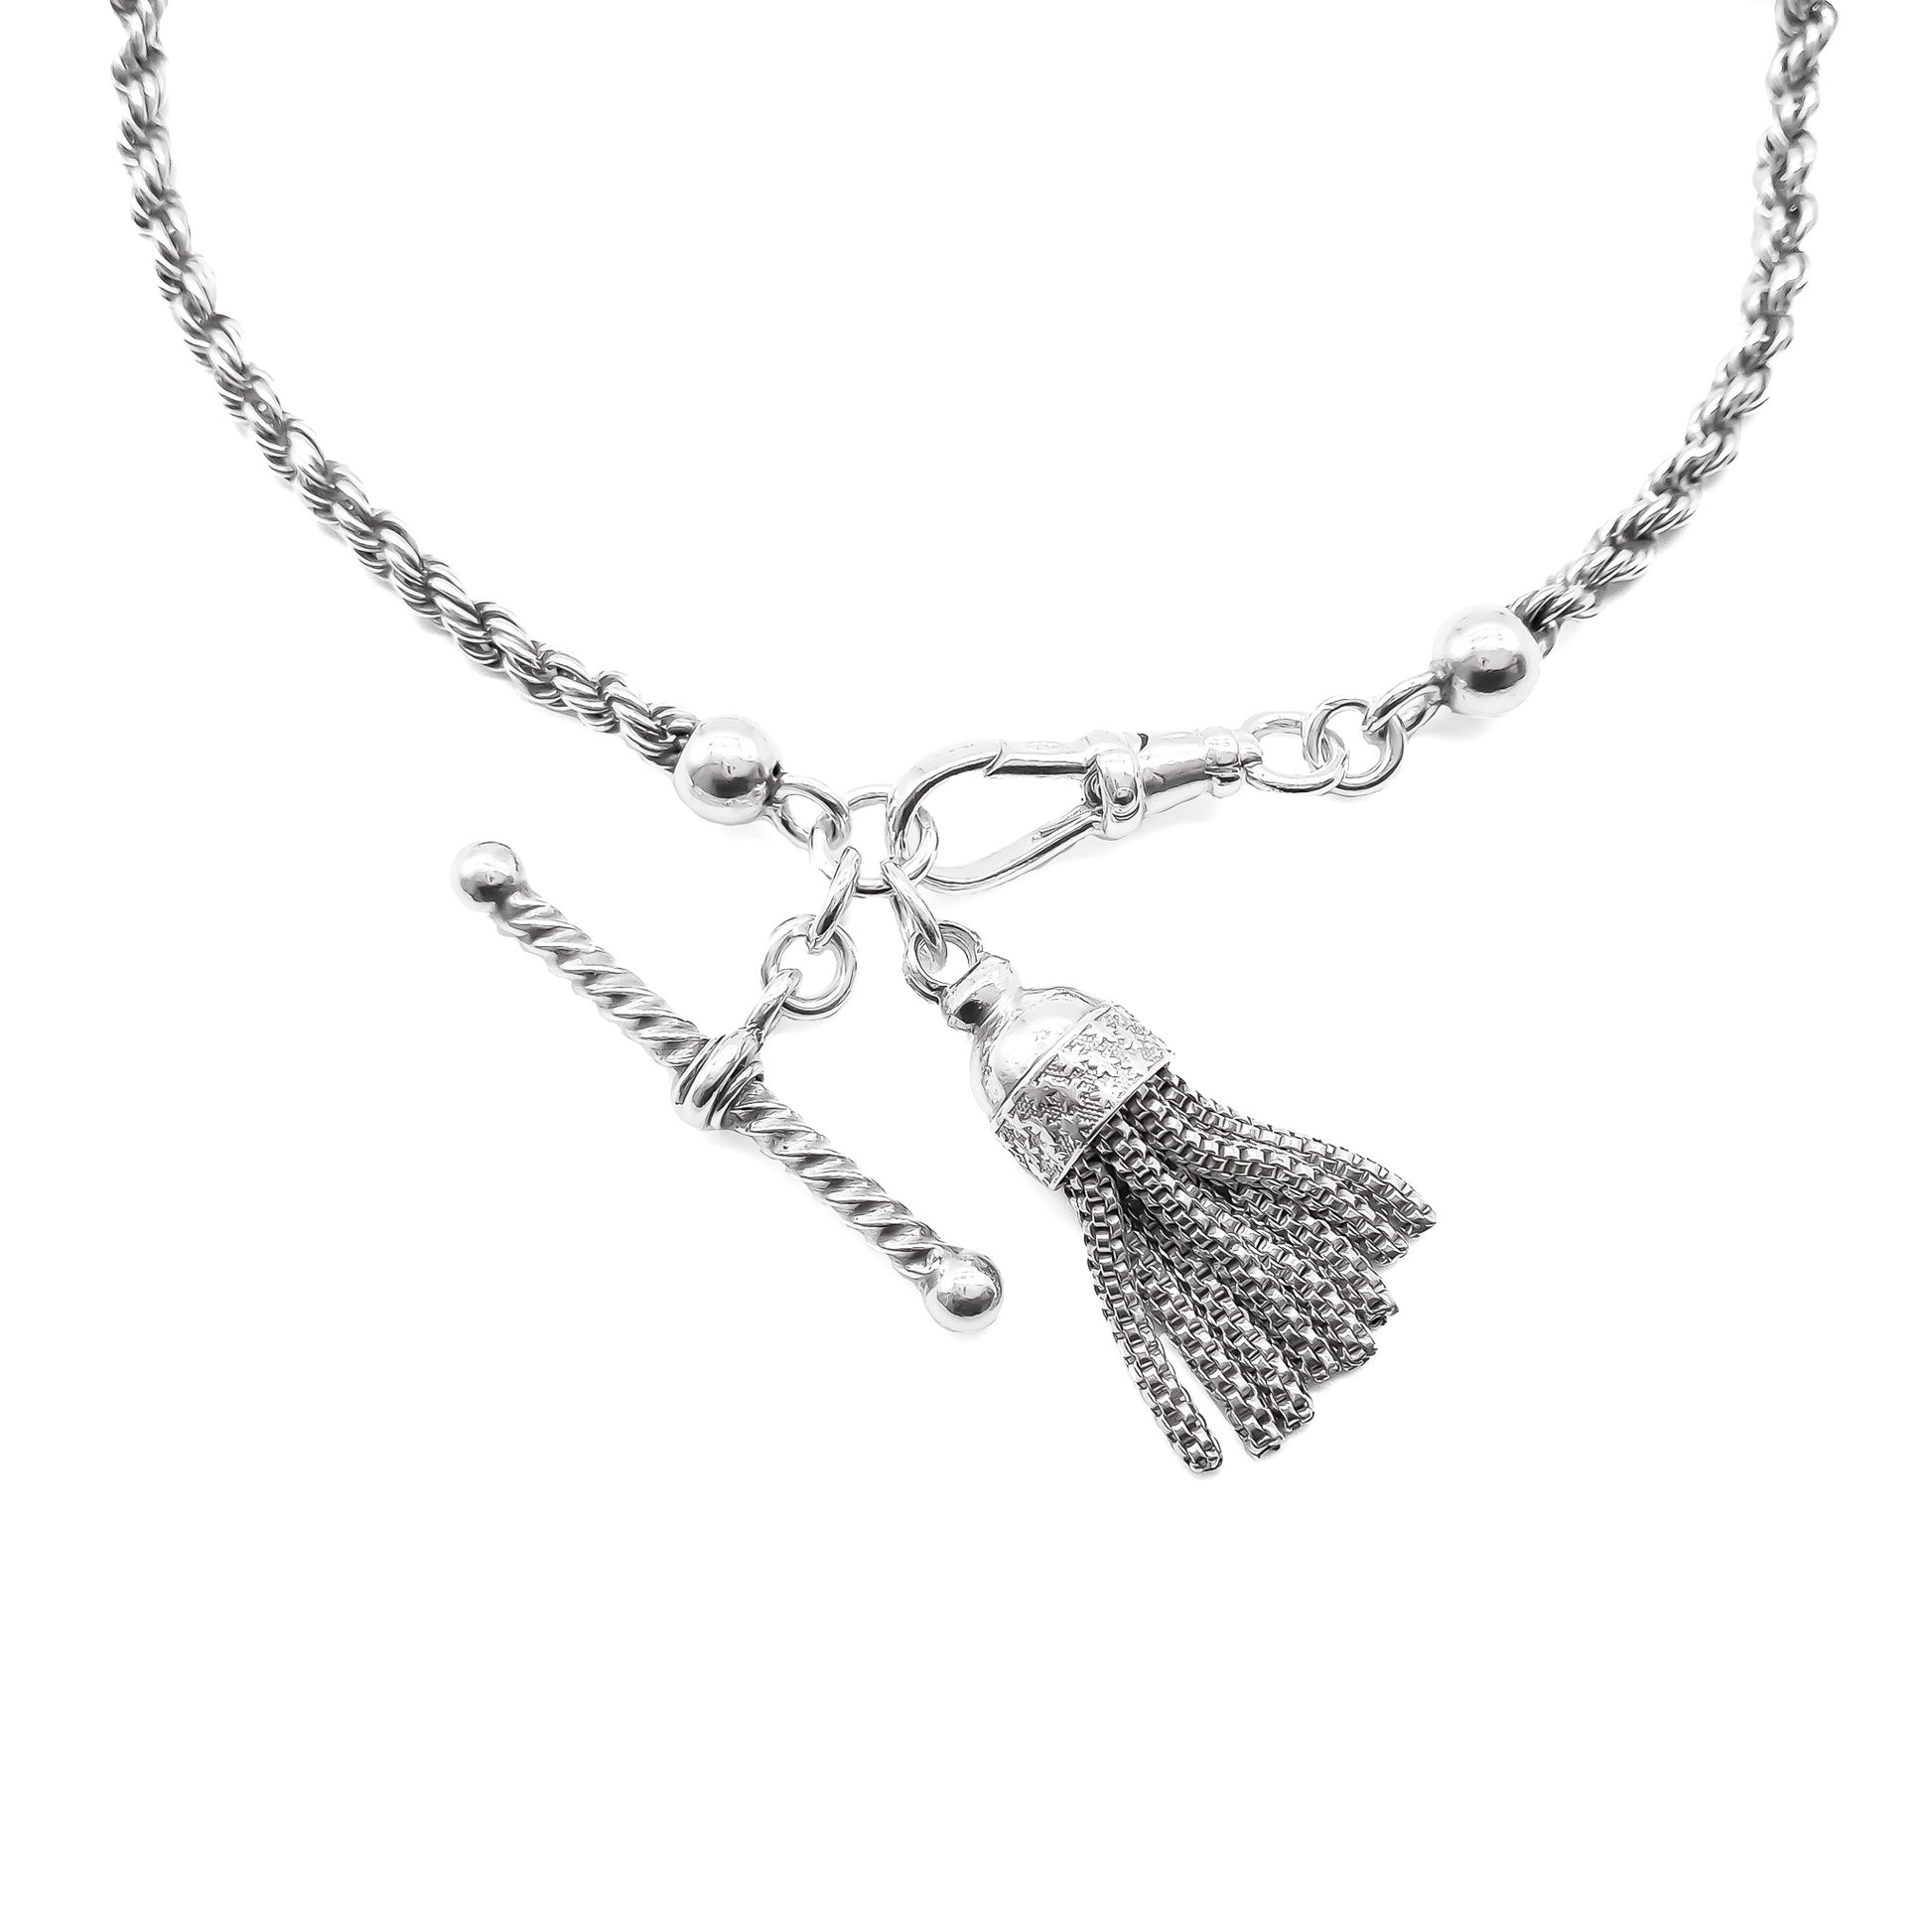 Lovely Victorian silver albertina with ornate detail, a dog clip, tassel and t-bar. Ideal to be attached to another albertina to make a neck chain.